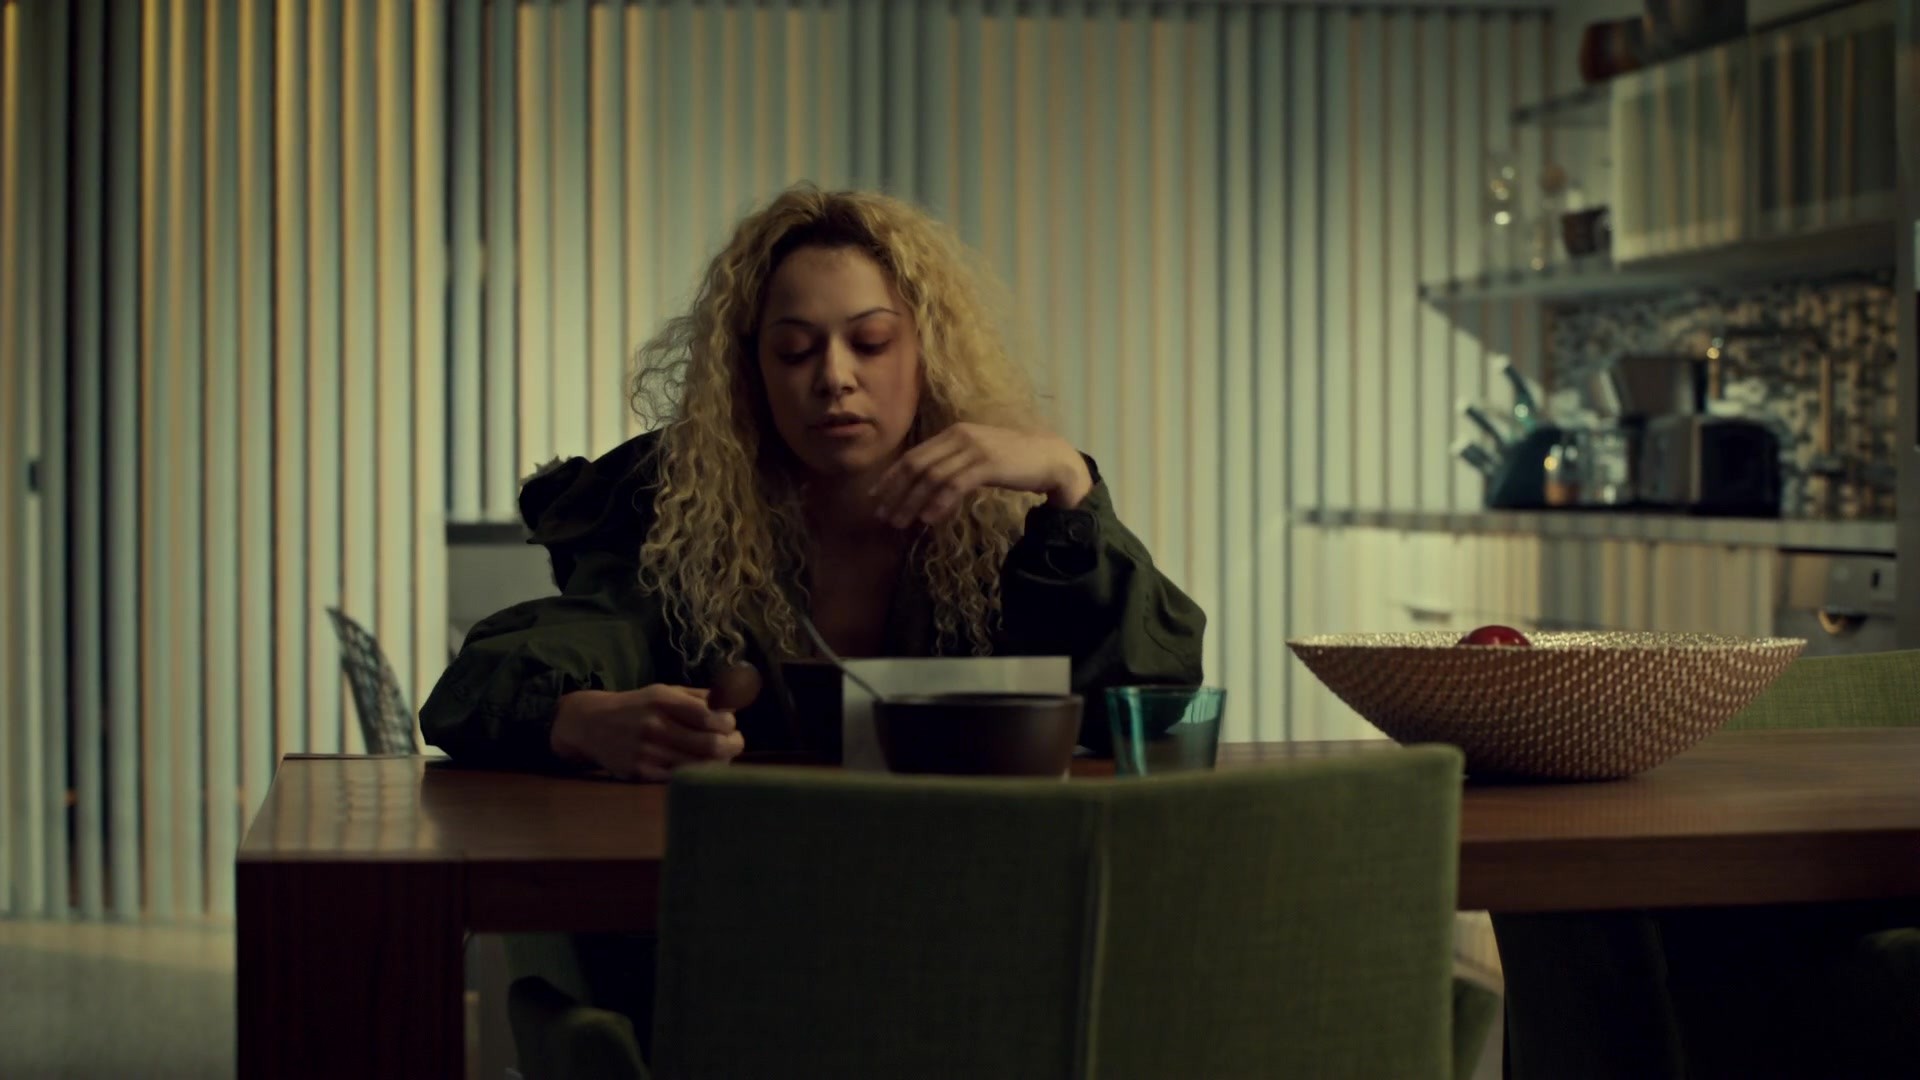 1920x1080 Episode 7 - Orphan Black S01E07 Parts Developed In An Unusual Manner 1080p  WEB-DL AAC 2 0 H 264-ECI 1531 - Orphan Black high quality screencaps gallery